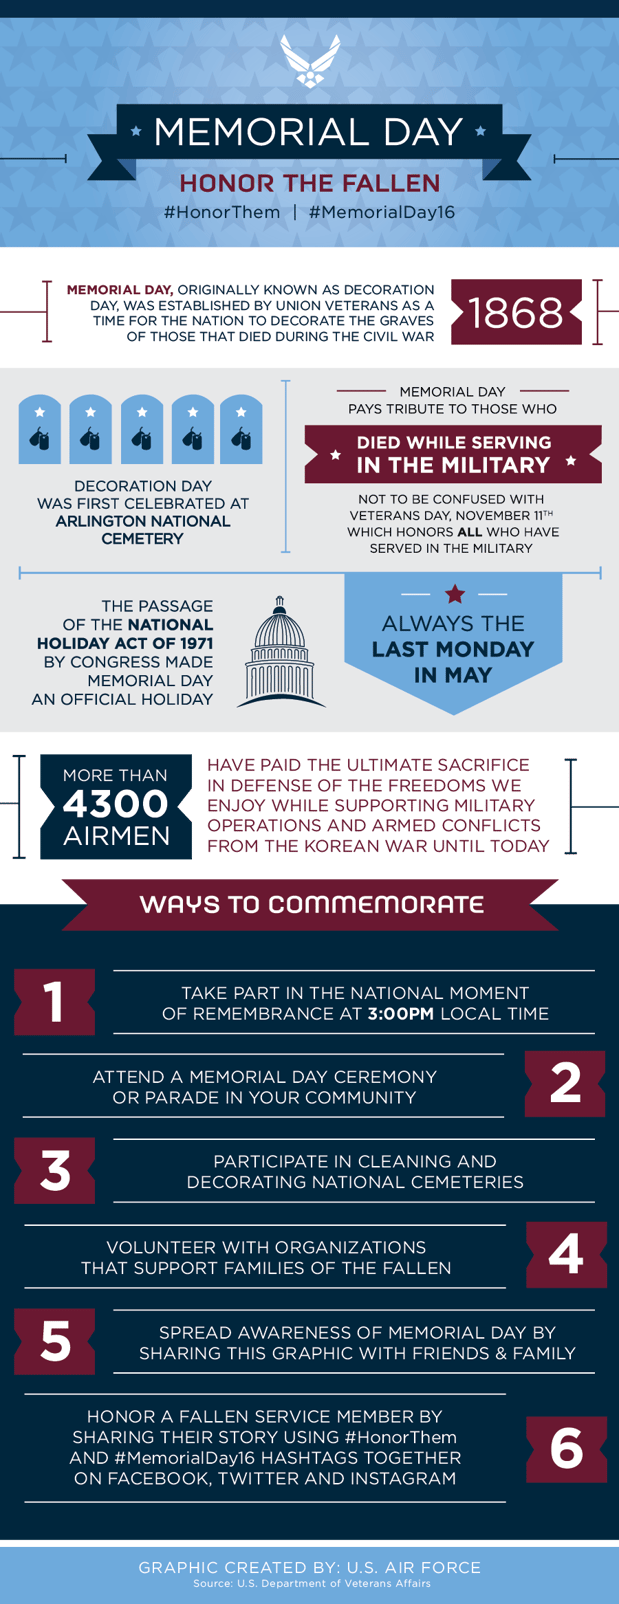 memorial day infographic